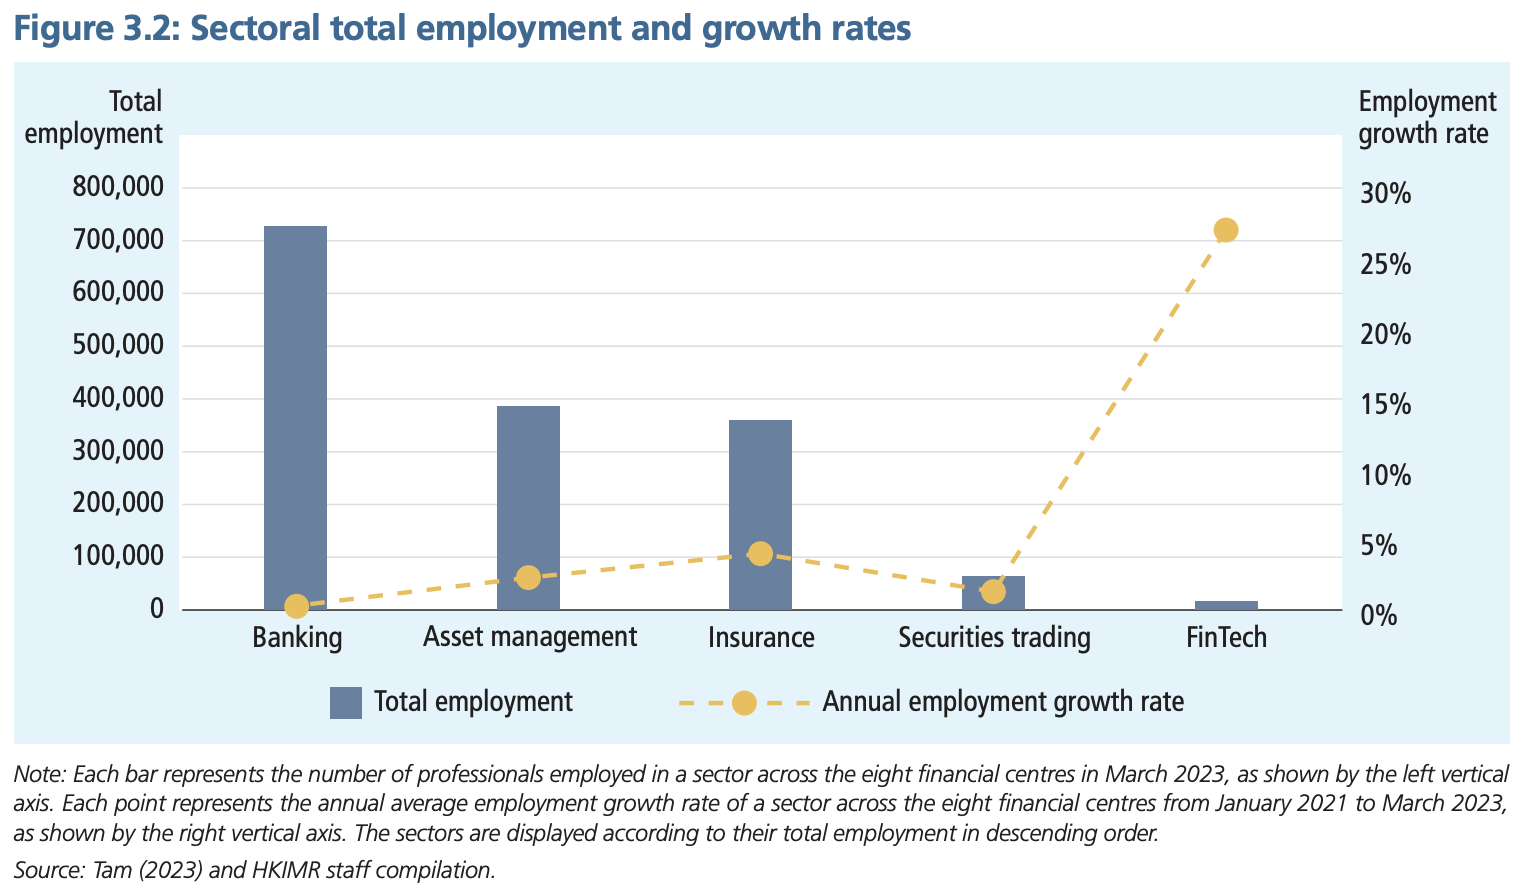 Sectoral total employment and growth rates, Source: Advancing Talent Development in Financial Services: Emerging Global Trends and Their Impact on Hong Kong